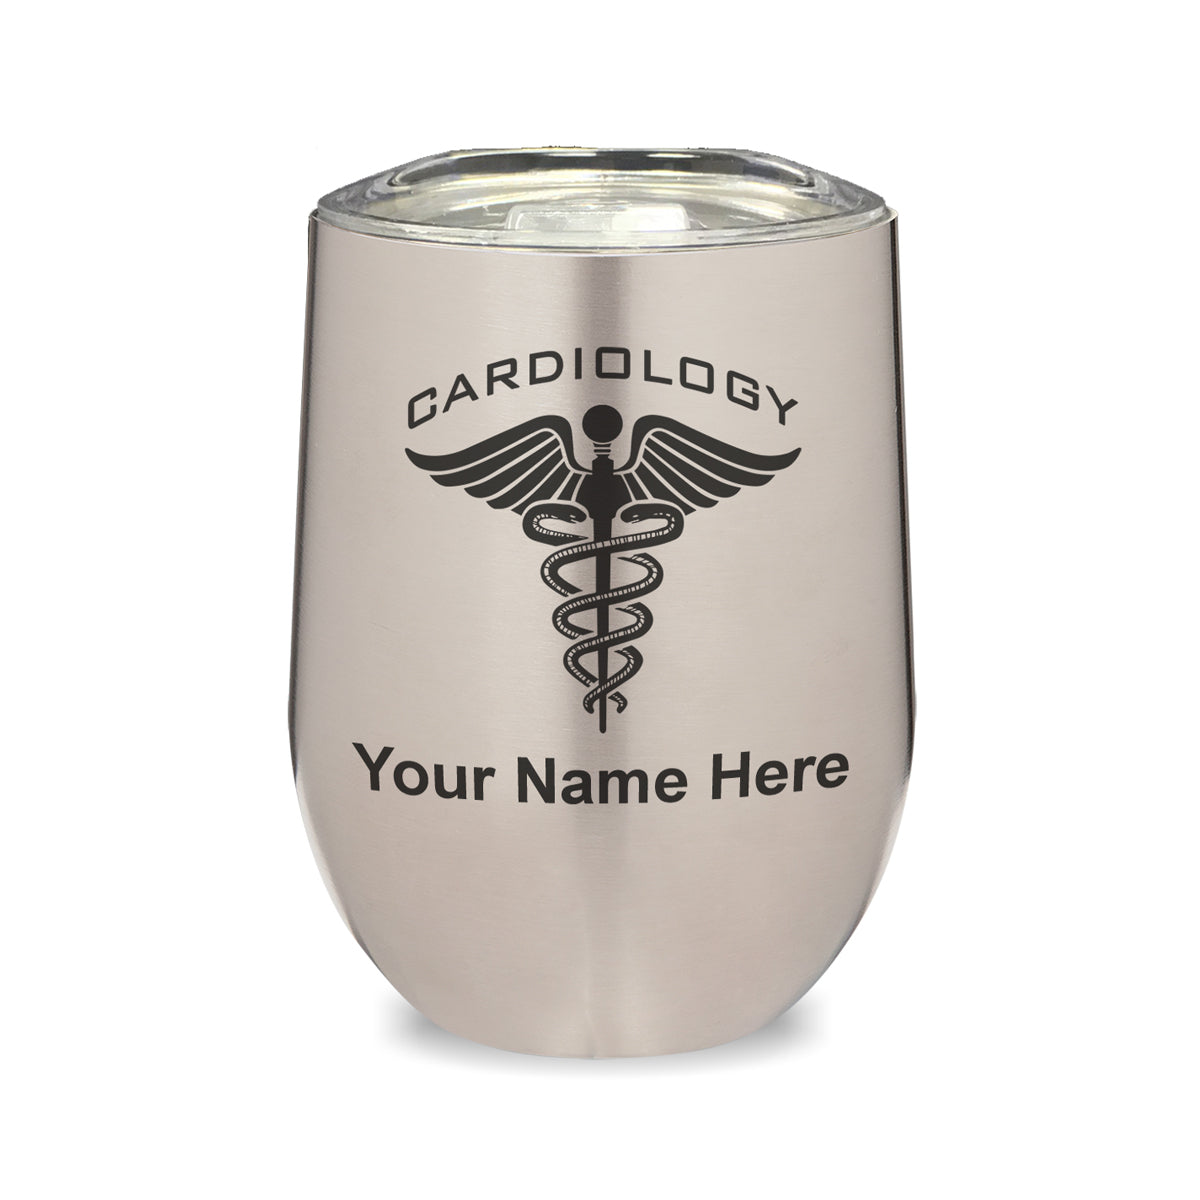 LaserGram Double Wall Stainless Steel Wine Glass, Cardiology, Personalized Engraving Included